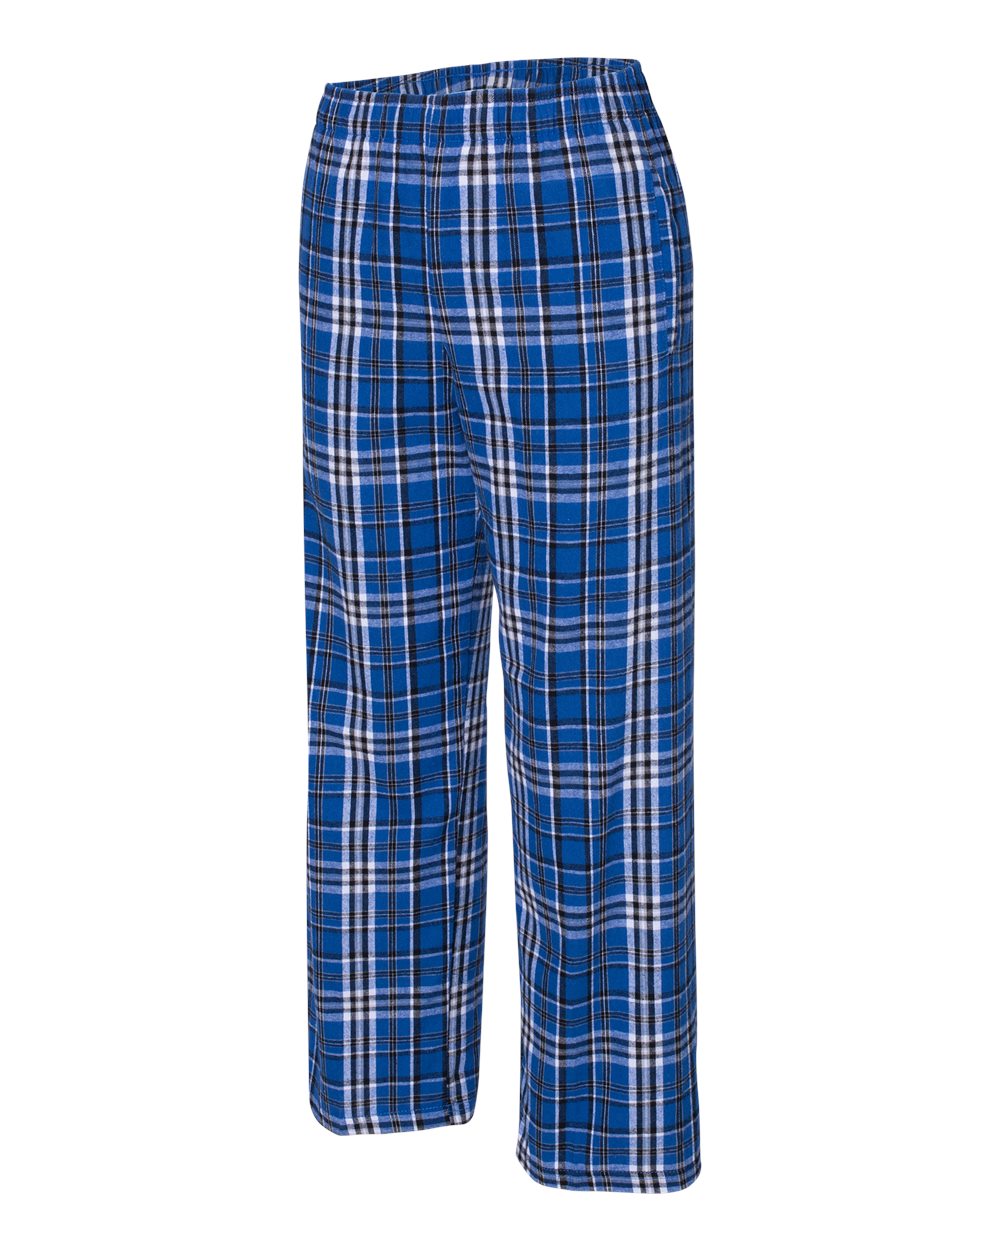 Boxercraft Y20 - Youth Flannel Pants with Pockets $16.14